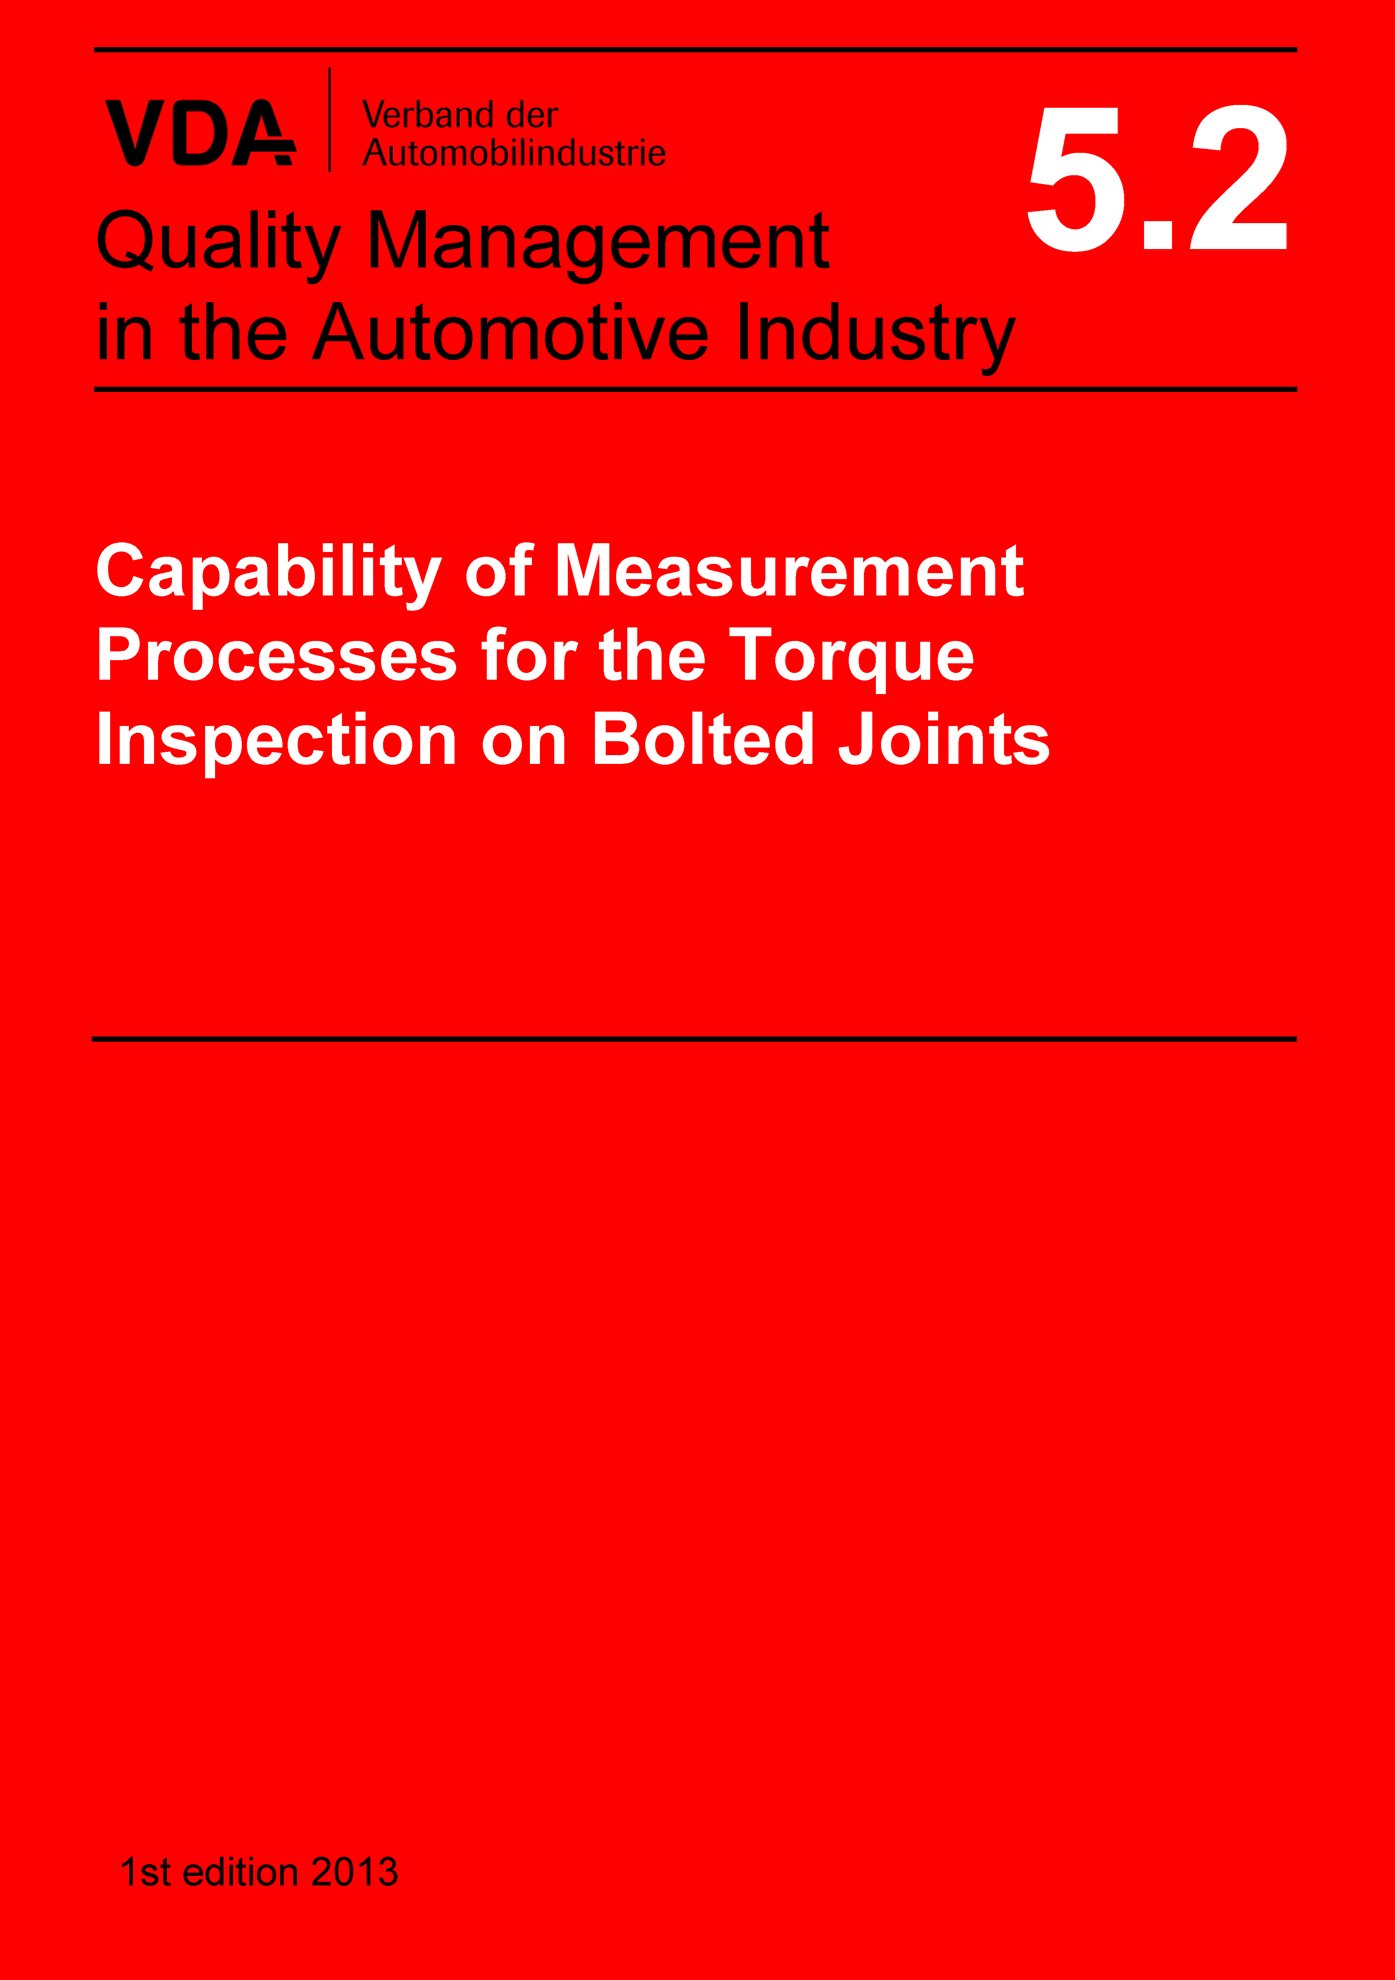 Publikace  VDA Volume 5.2 - Capability of Measurement
 Processes for the Torque Inspection on Bolted Joints, 1st edition 2013 1.1.2013 náhled